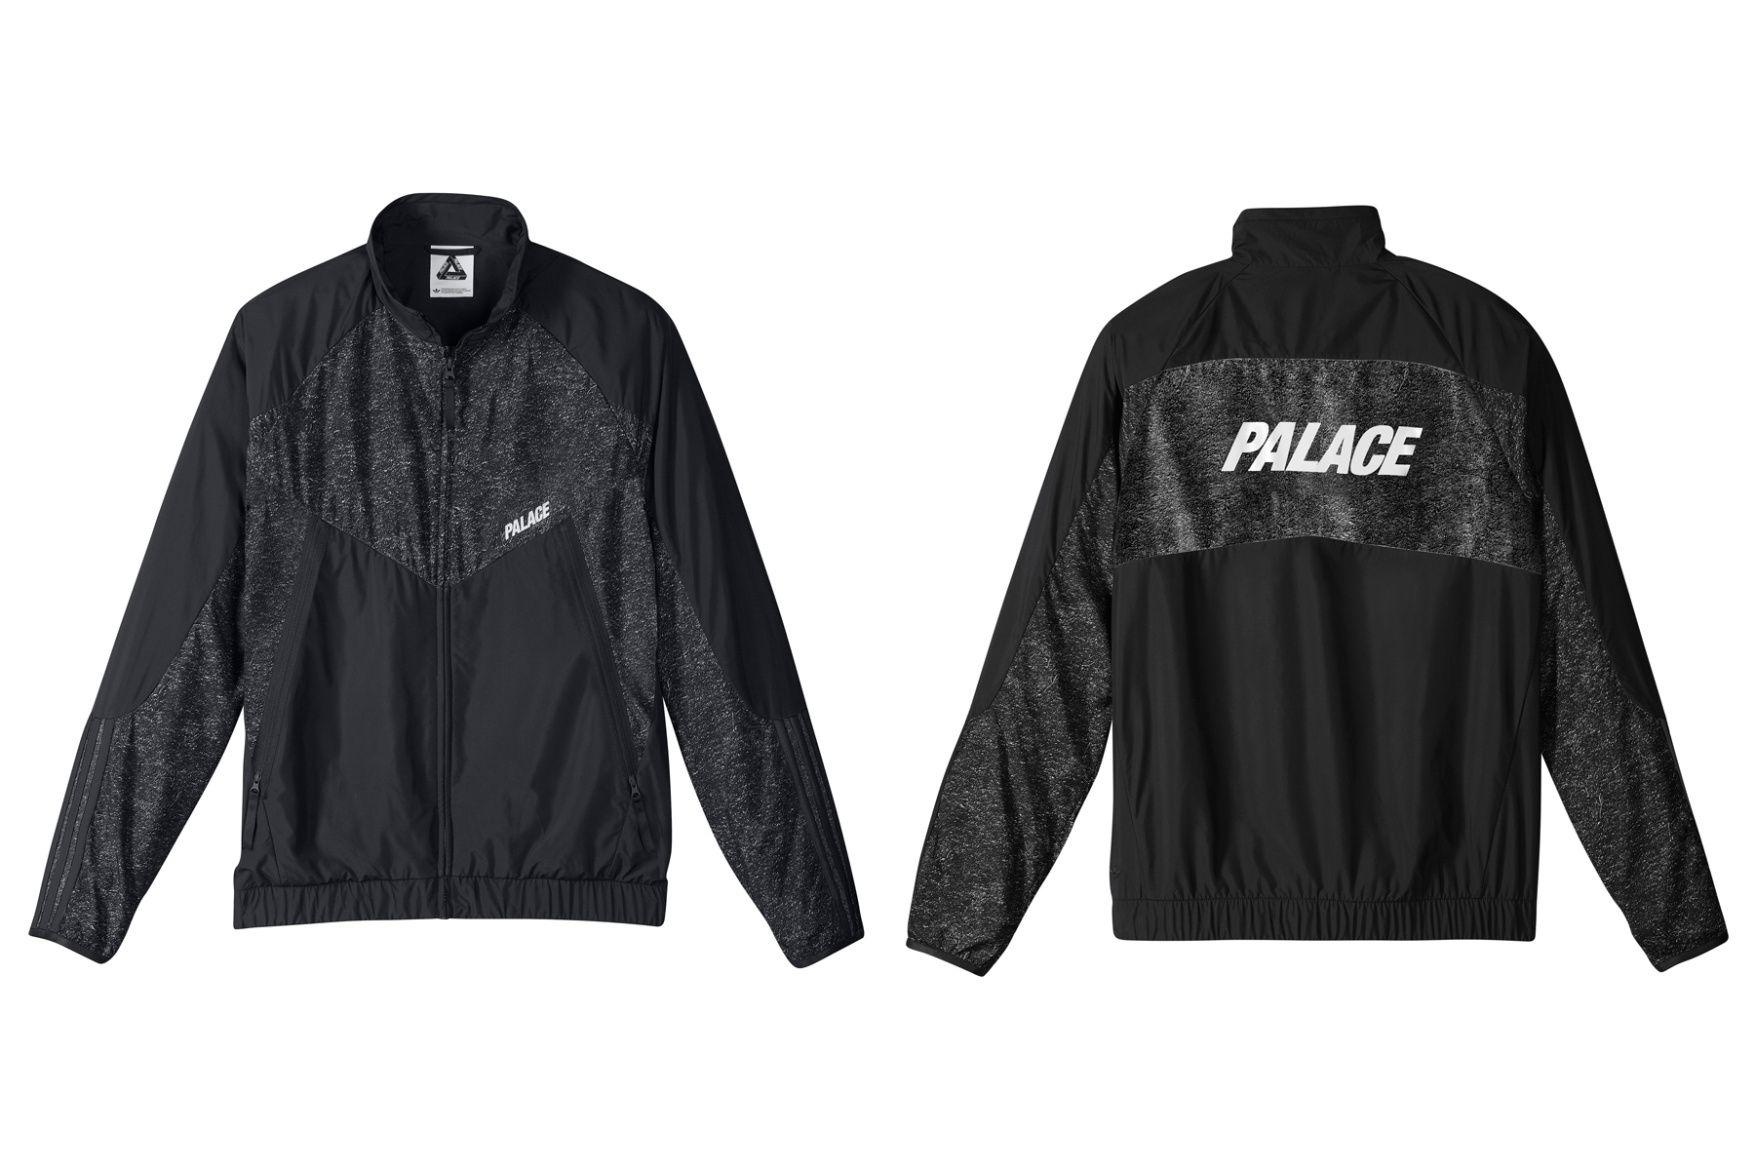 Adidas X Palace Clothing Logo - Palace Skateboards Unveils Part 2 of Their adidas Collection